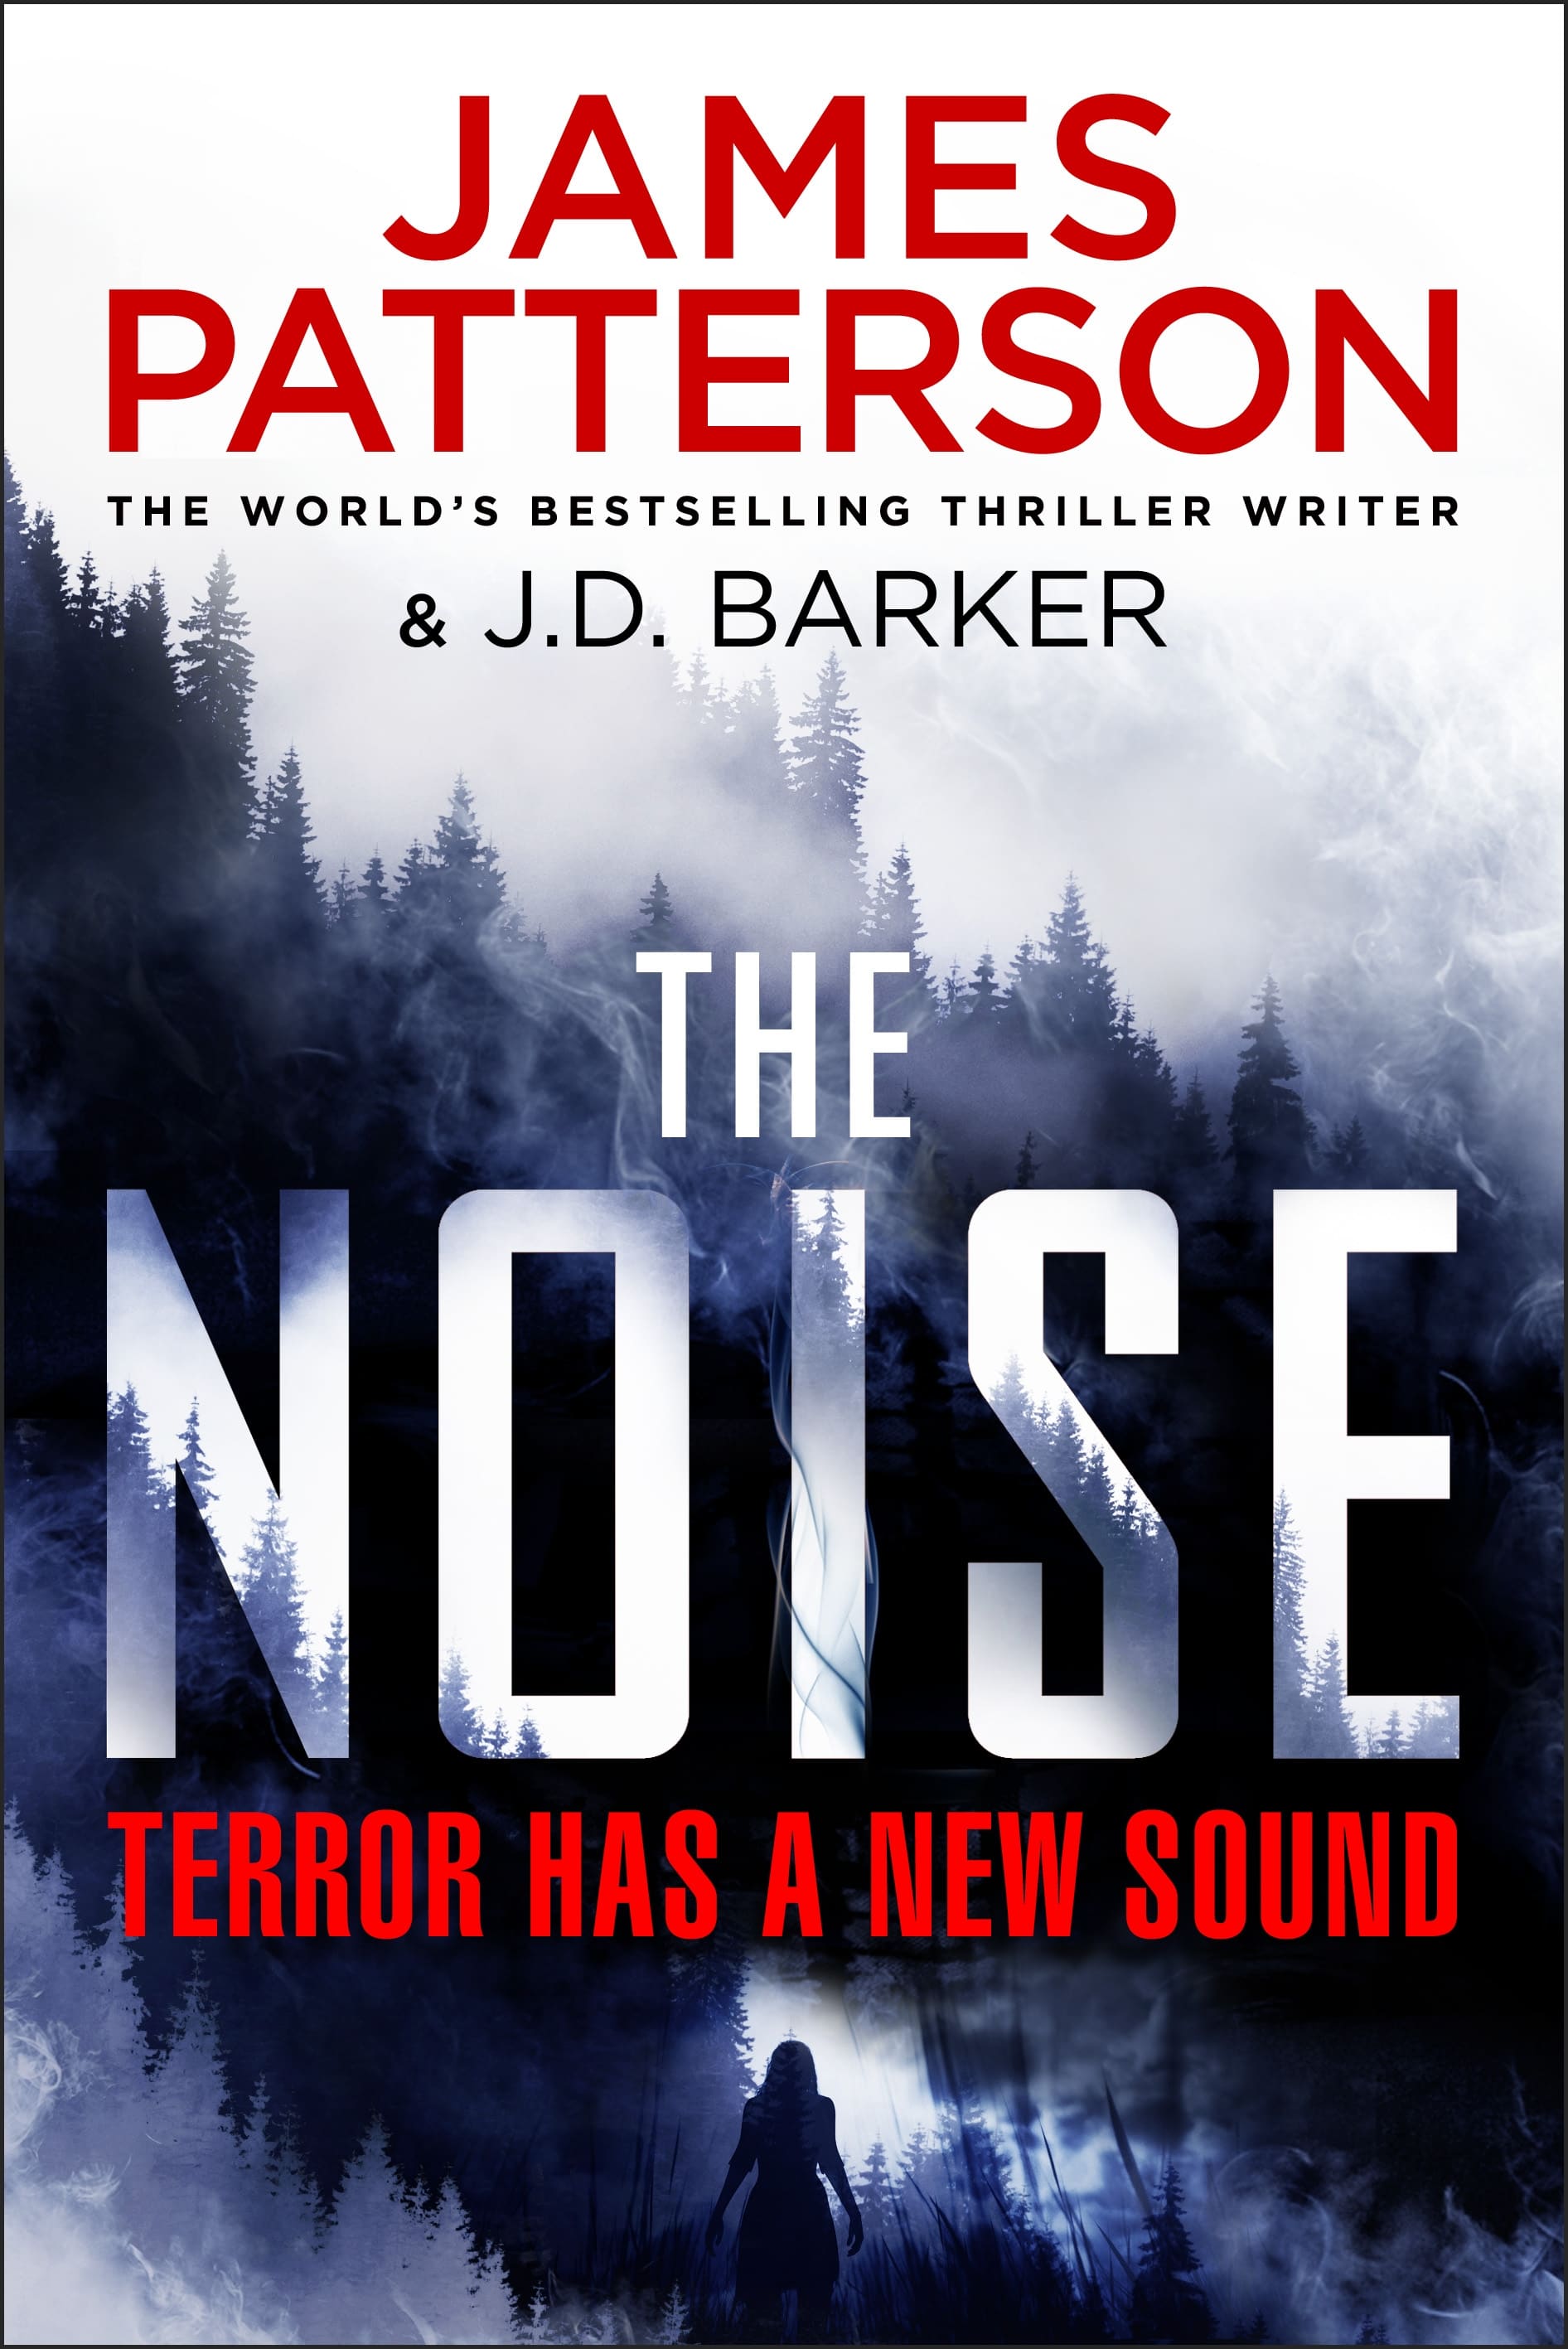 Book cover of The Noise by James Patterson